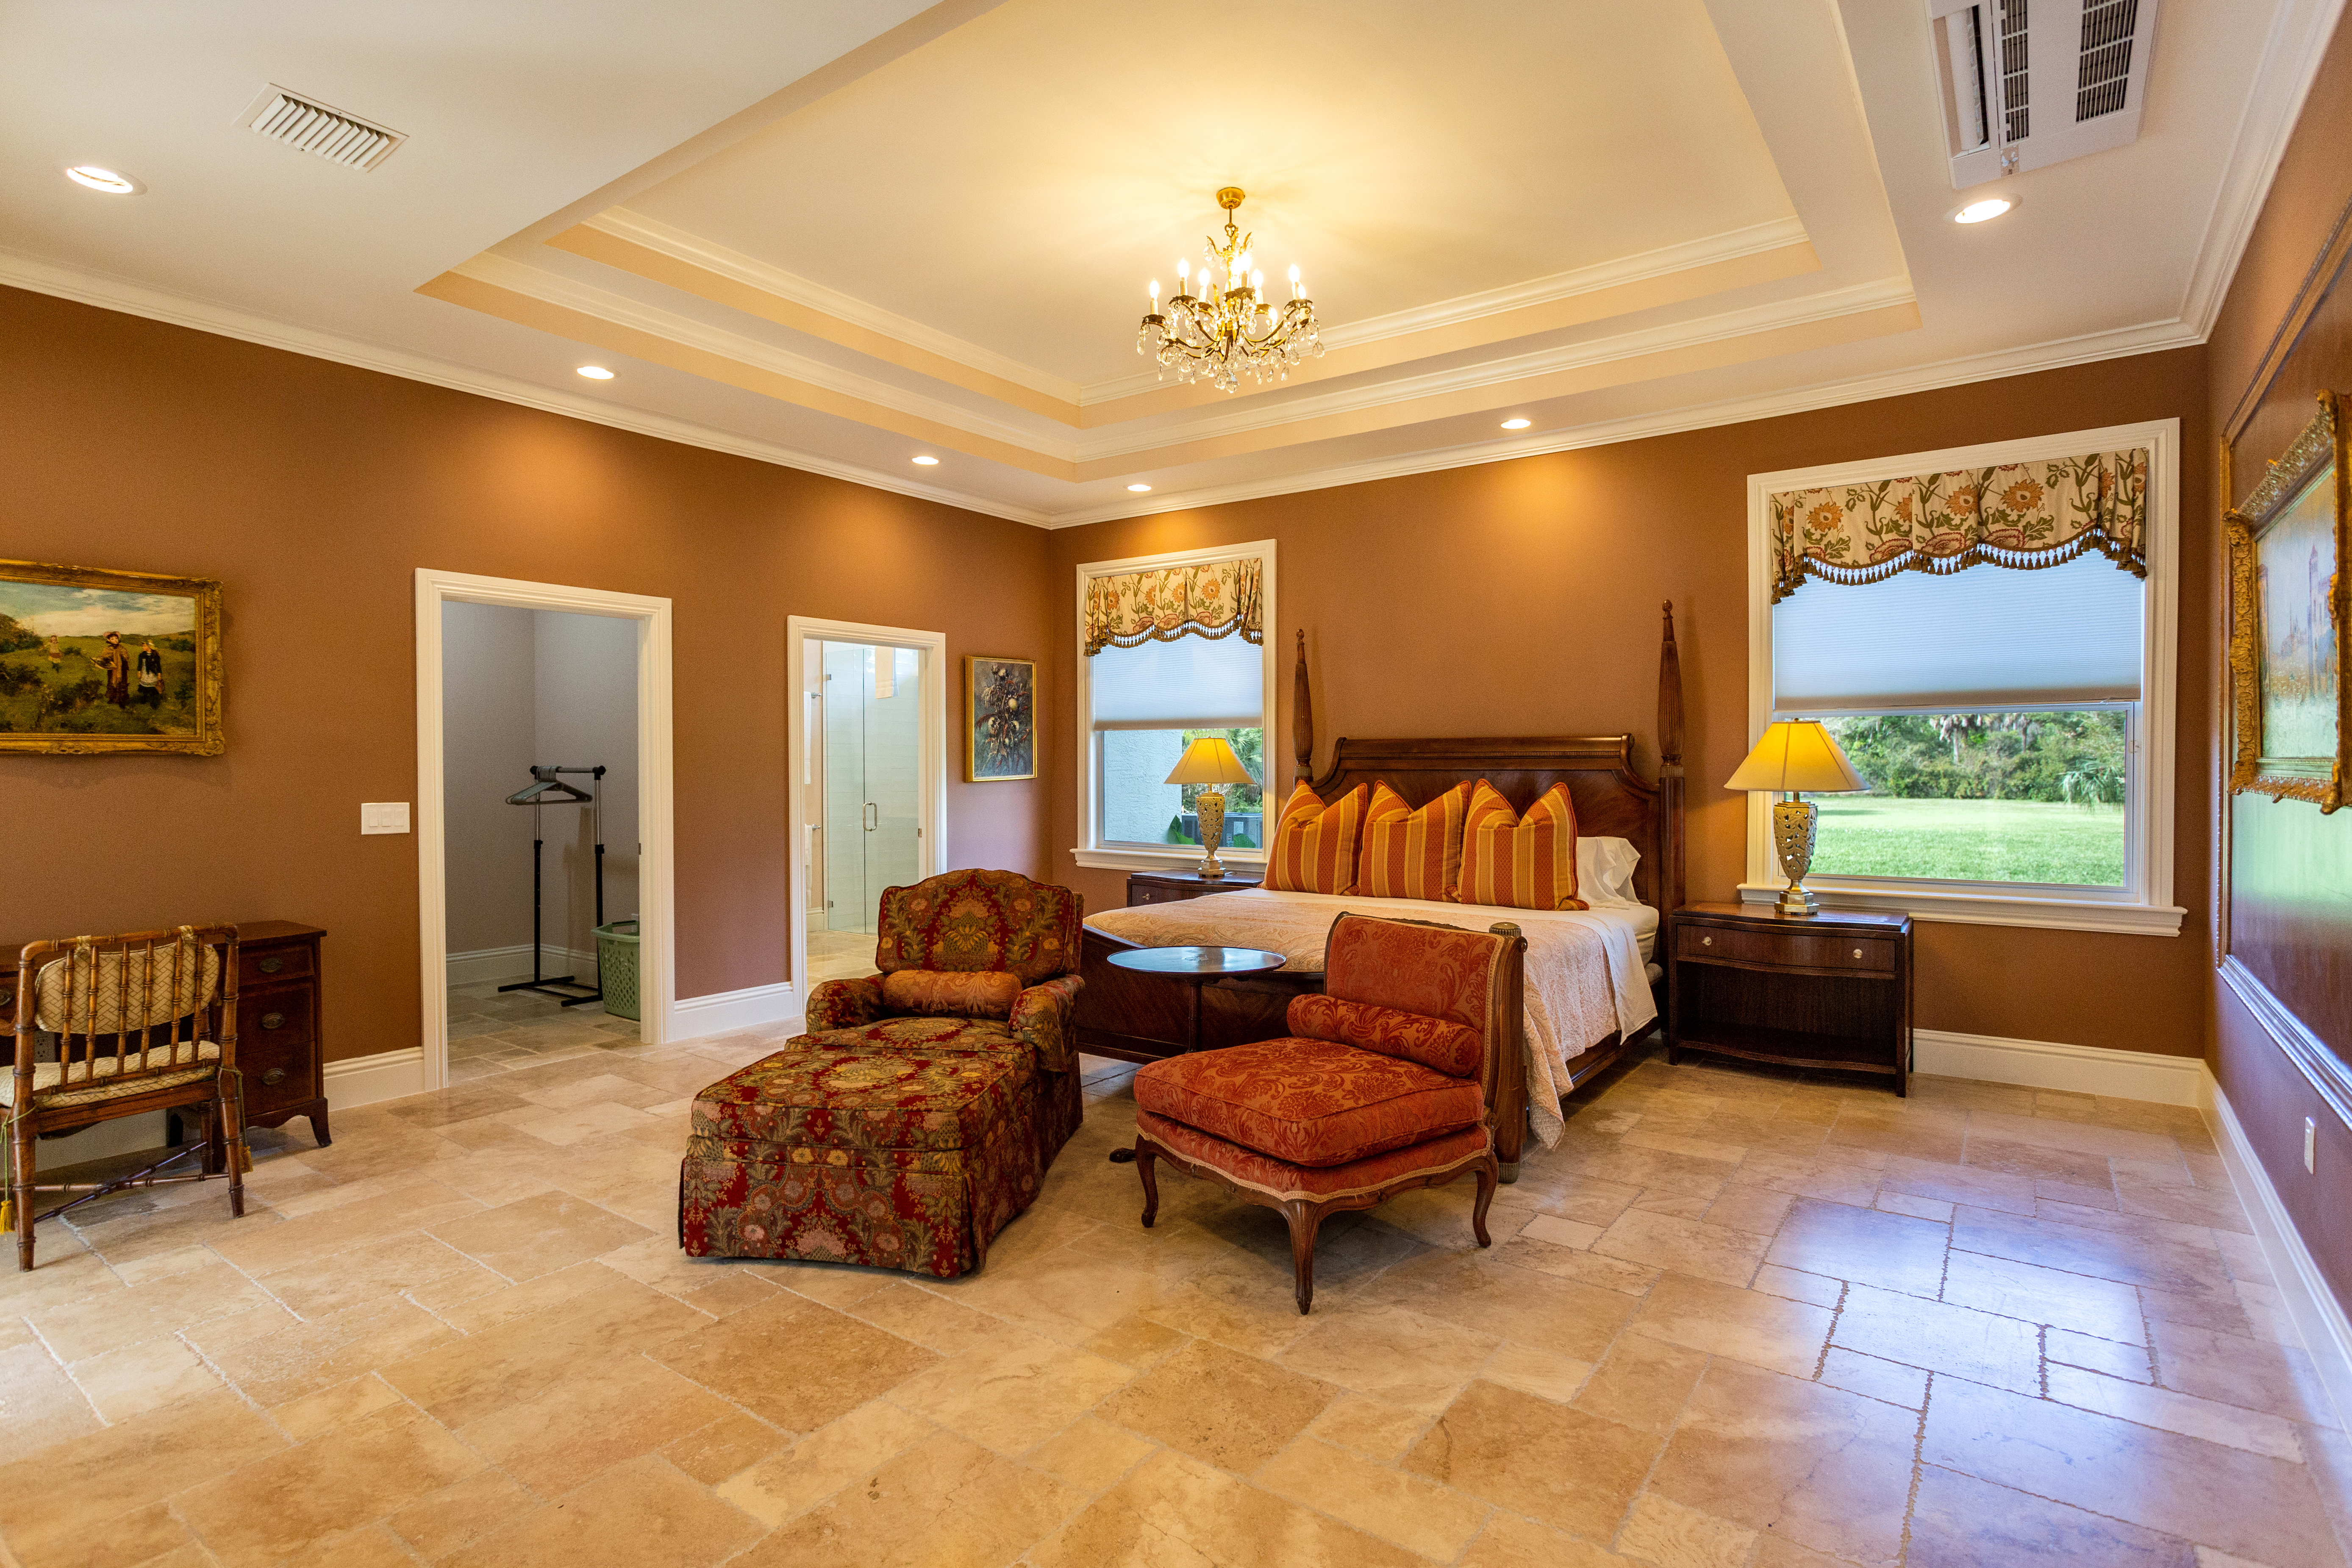 Suite 11 at the Knickerbocker Estate of Naples